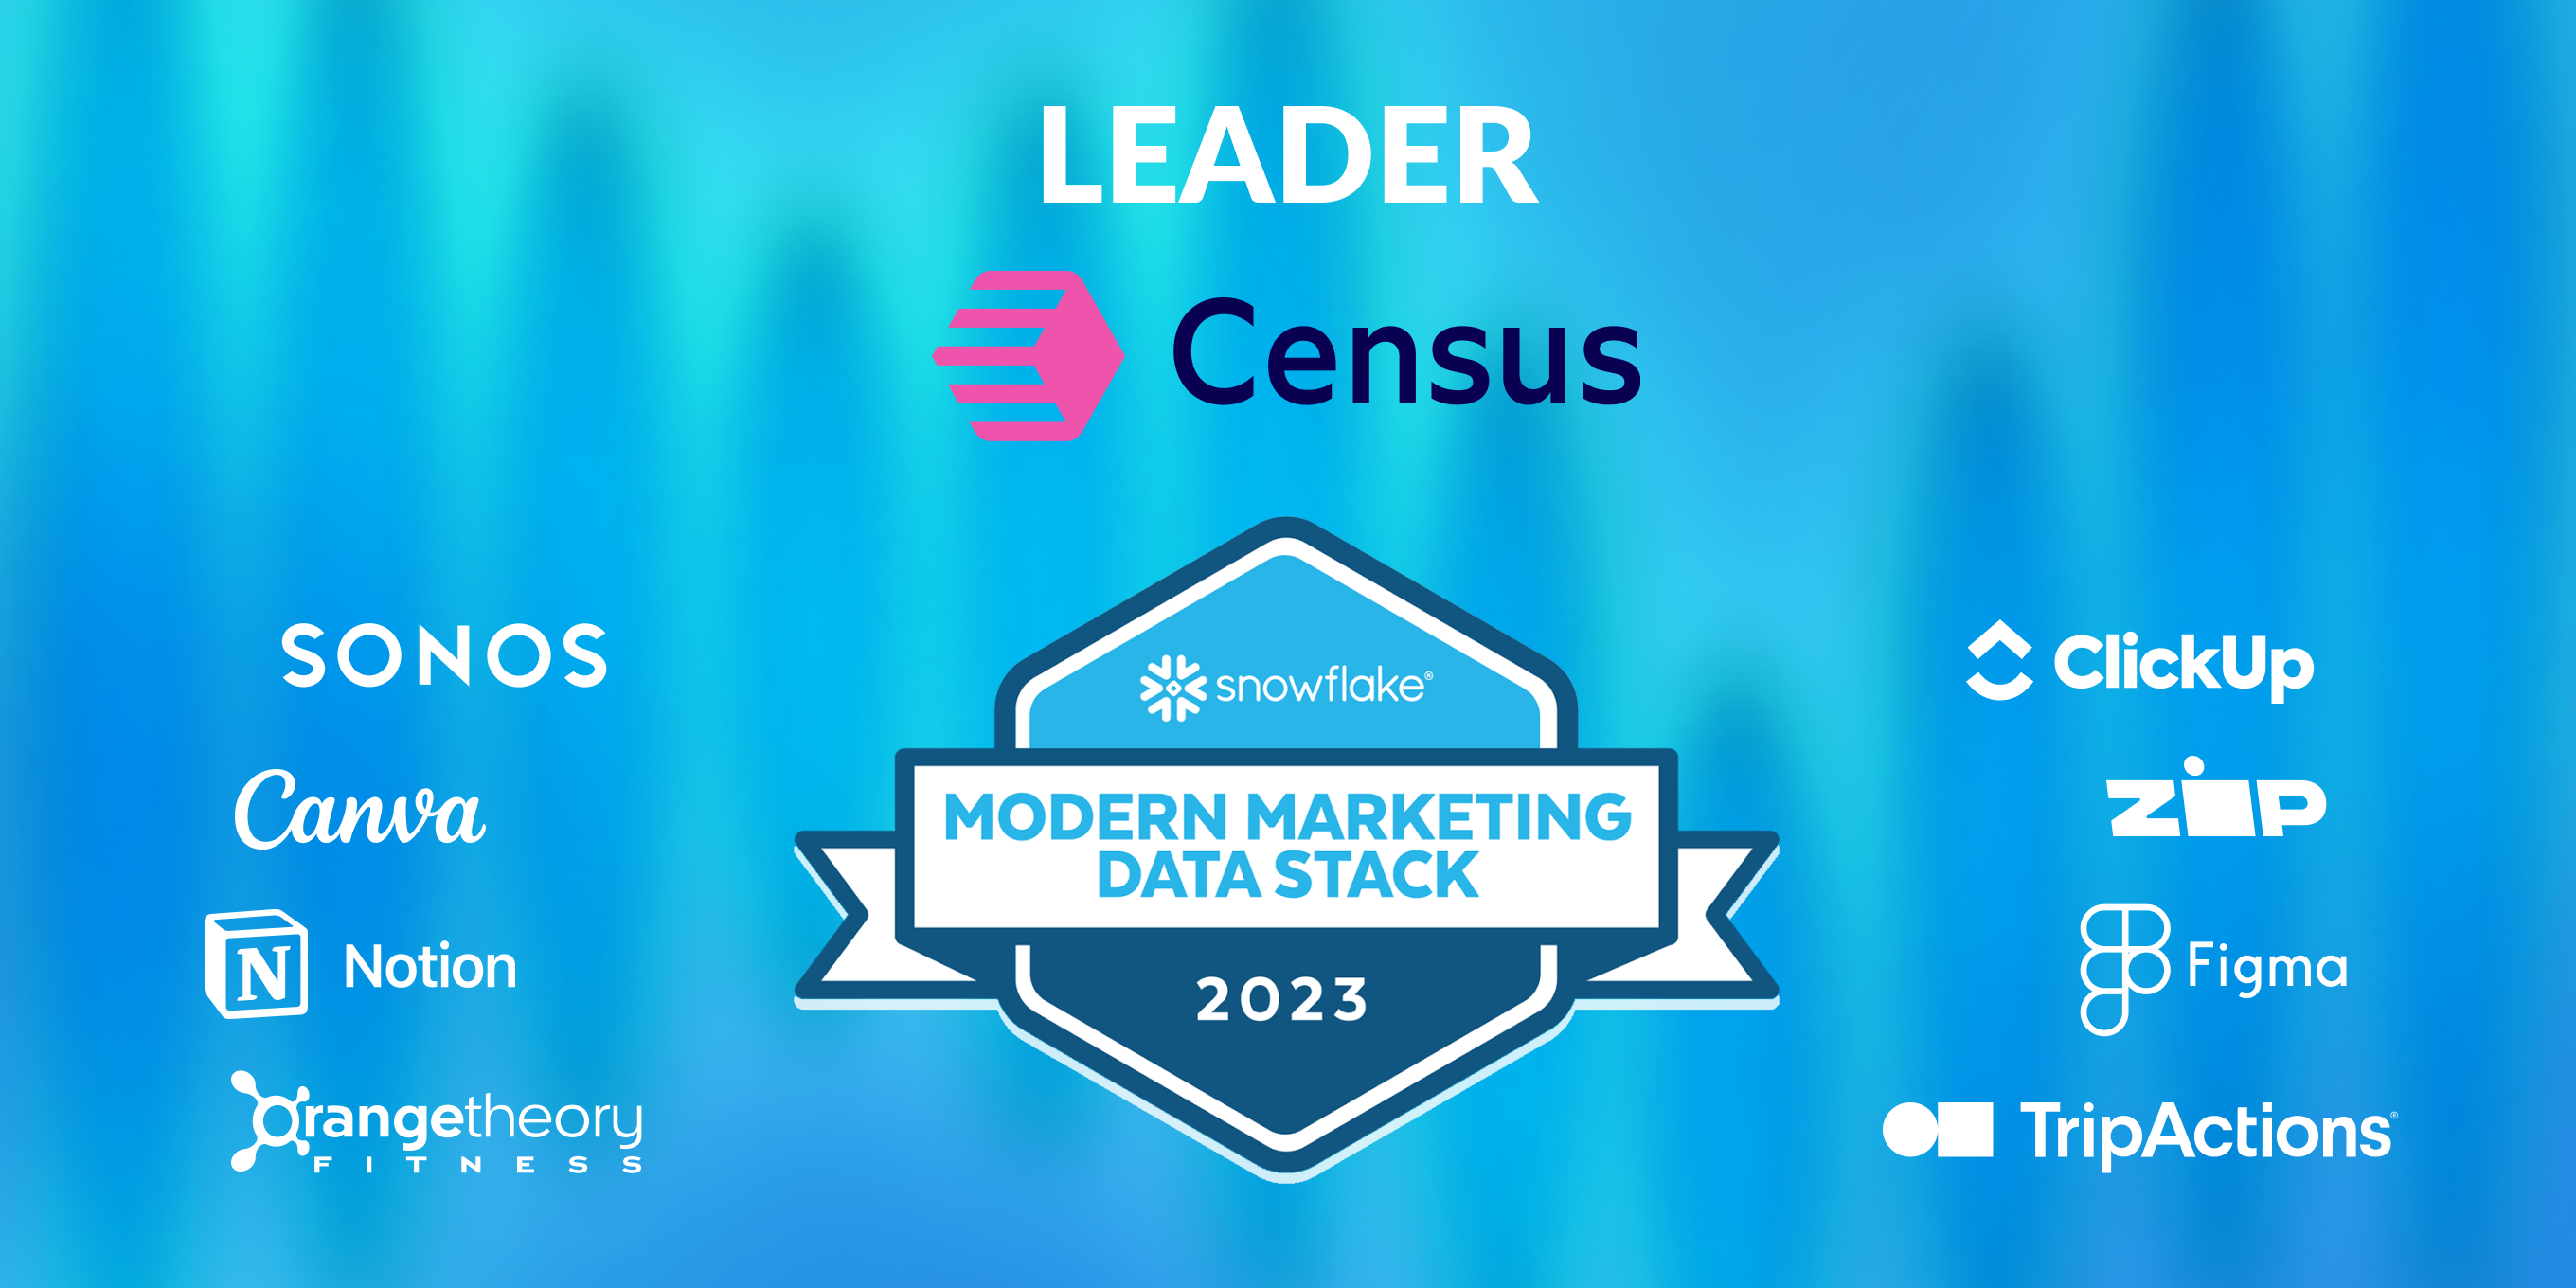 Census is a Leader in Snowflake’s 2023 Modern Marketing Data Stack Report